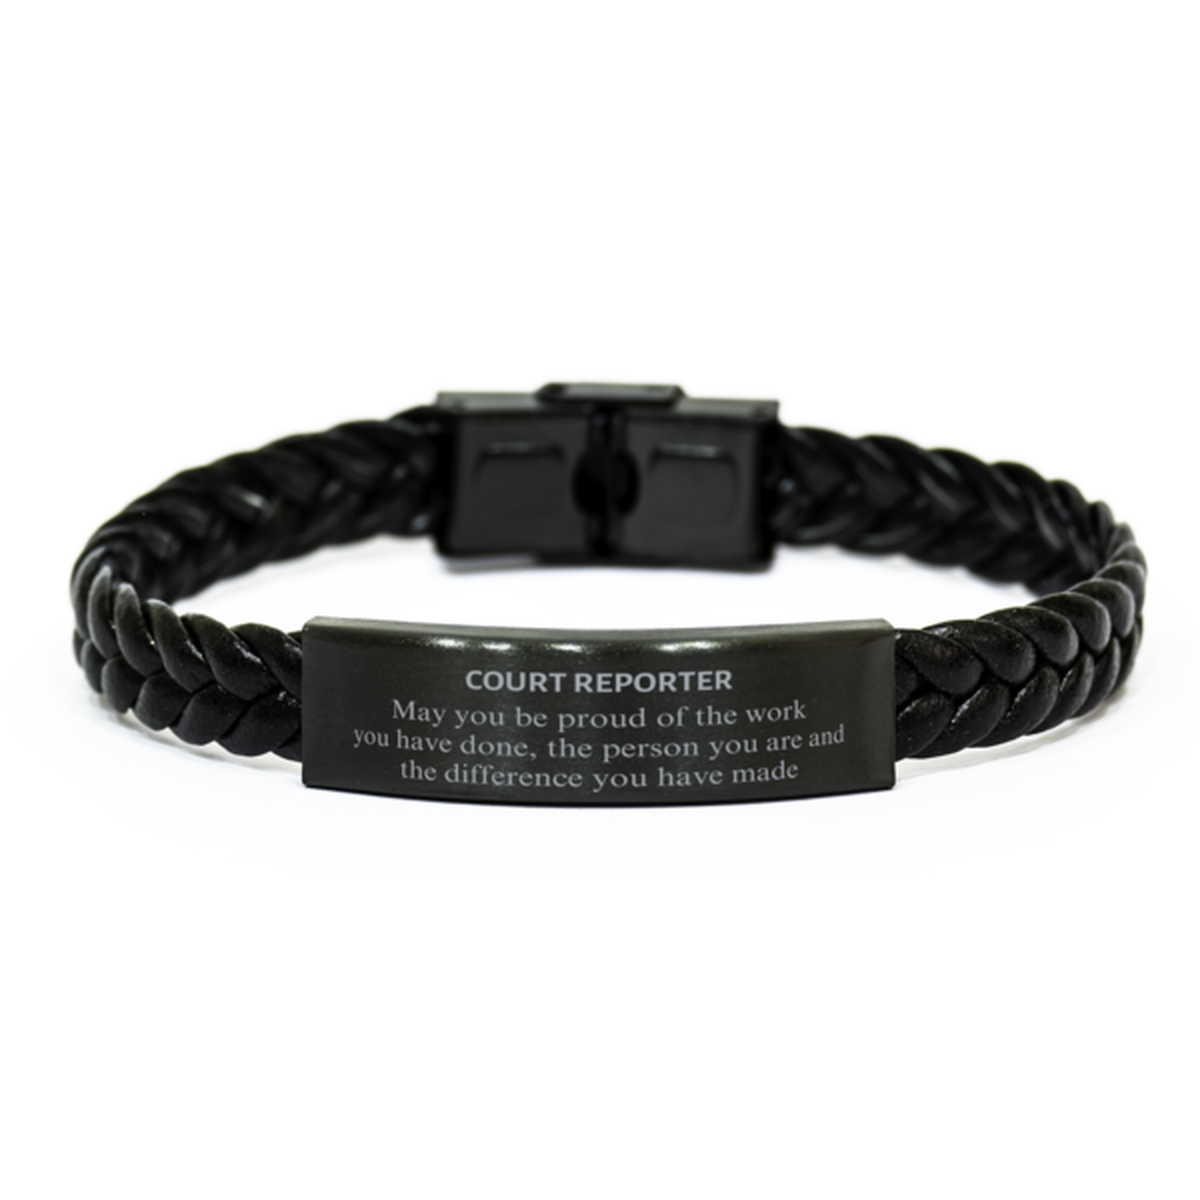 Court Reporter May you be proud of the work you have done, Retirement Court Reporter Braided Leather Bracelet for Colleague Appreciation Gifts Amazing for Court Reporter